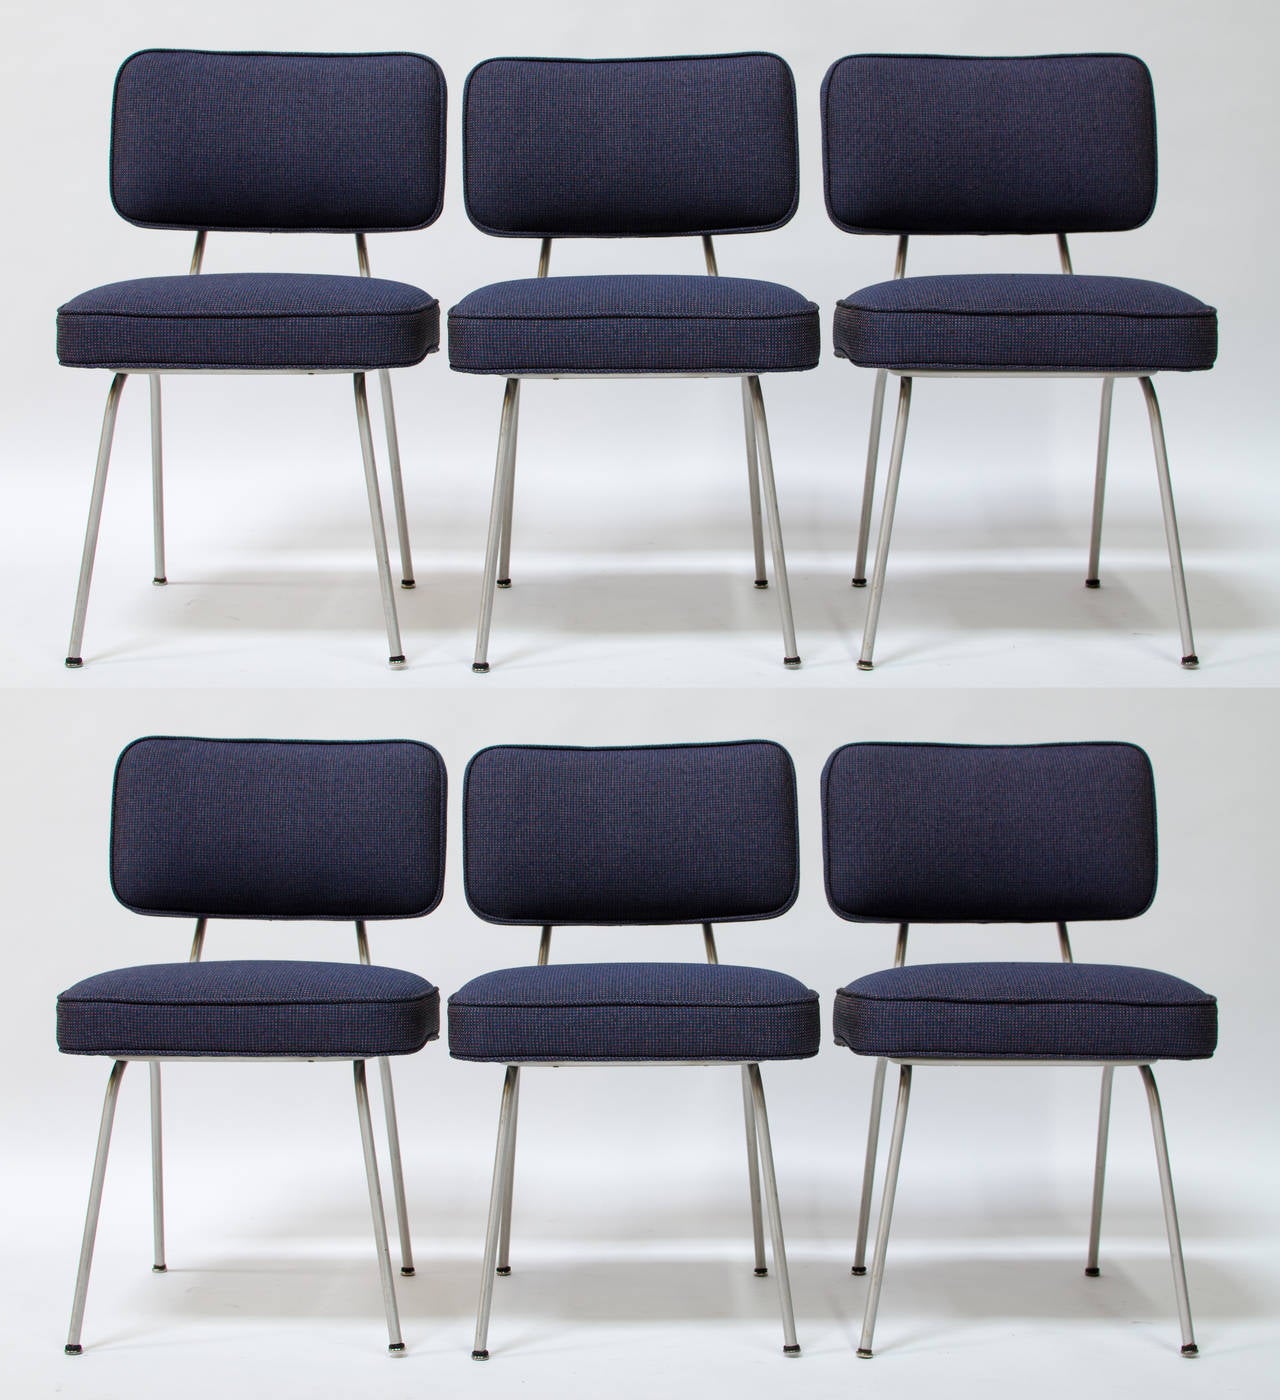 A rather uncommon and early set of six dining chair by George Nelson for Herman Miller, circa 1948, having tubular zinc-plated frames with floating upholstered seats and backs. Newly reupholstered in new old stock Alexander Girard hopsack fabric.